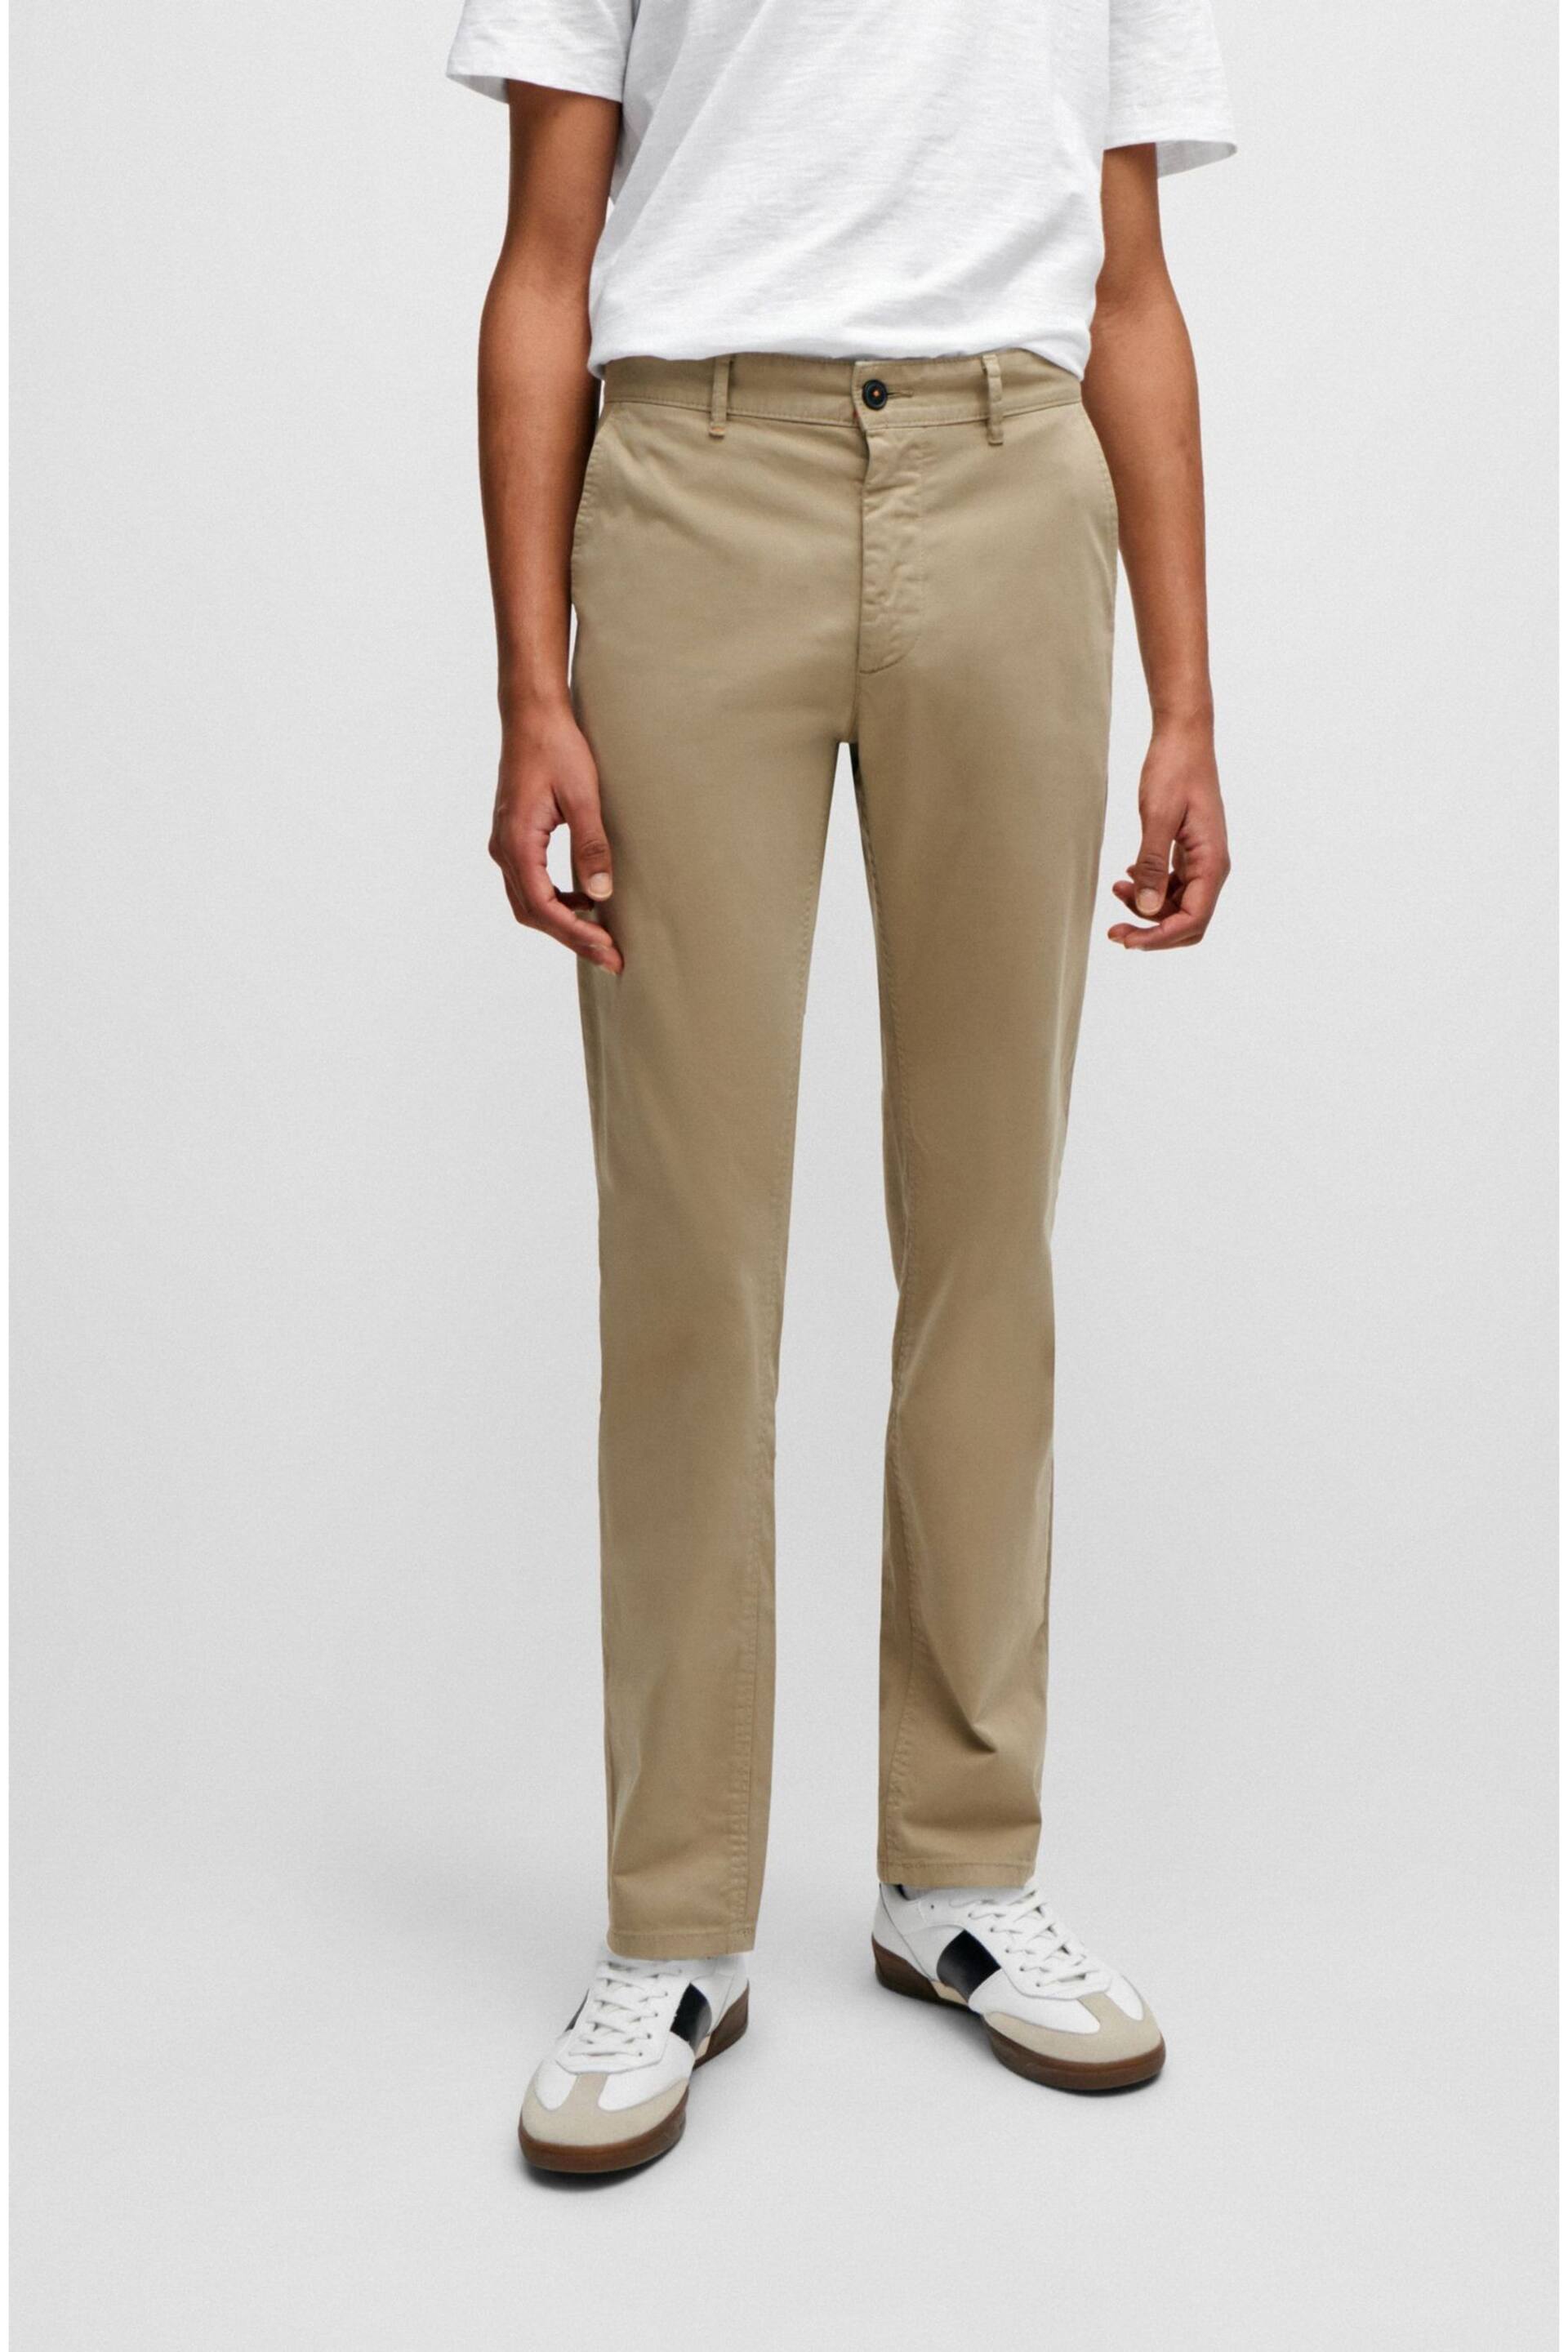 BOSS Natural Slim Fit Stretch Cotton Trousers - Image 1 of 5